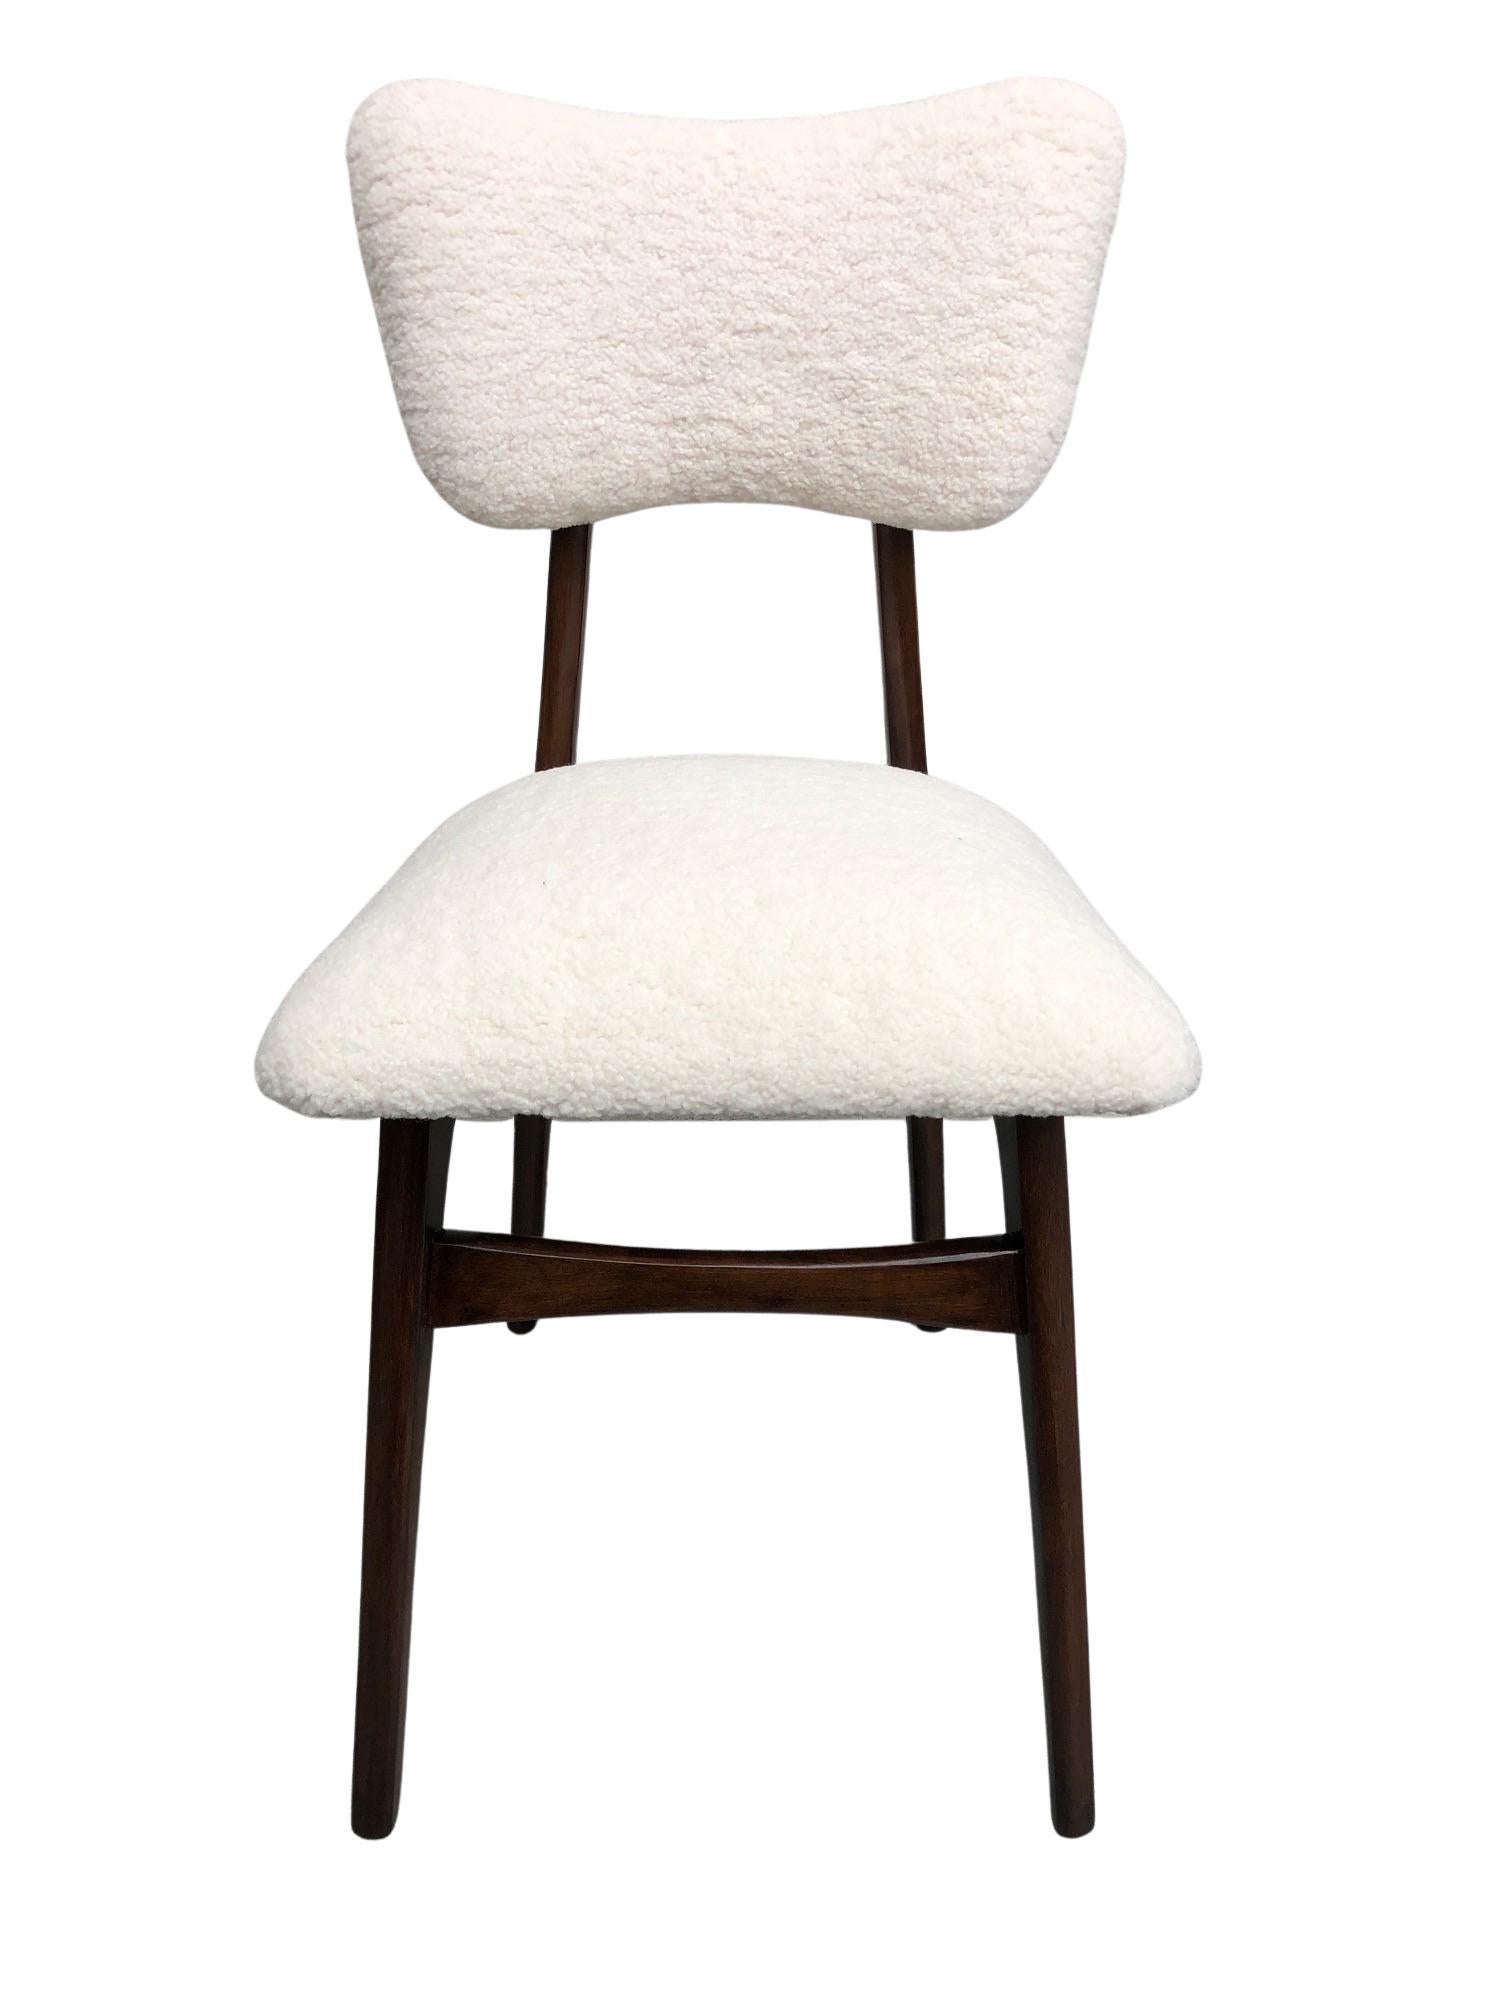 Set of 10 Mid-Century Cream Boucle Butterfly Chairs, Europe, 1960s For Sale 2